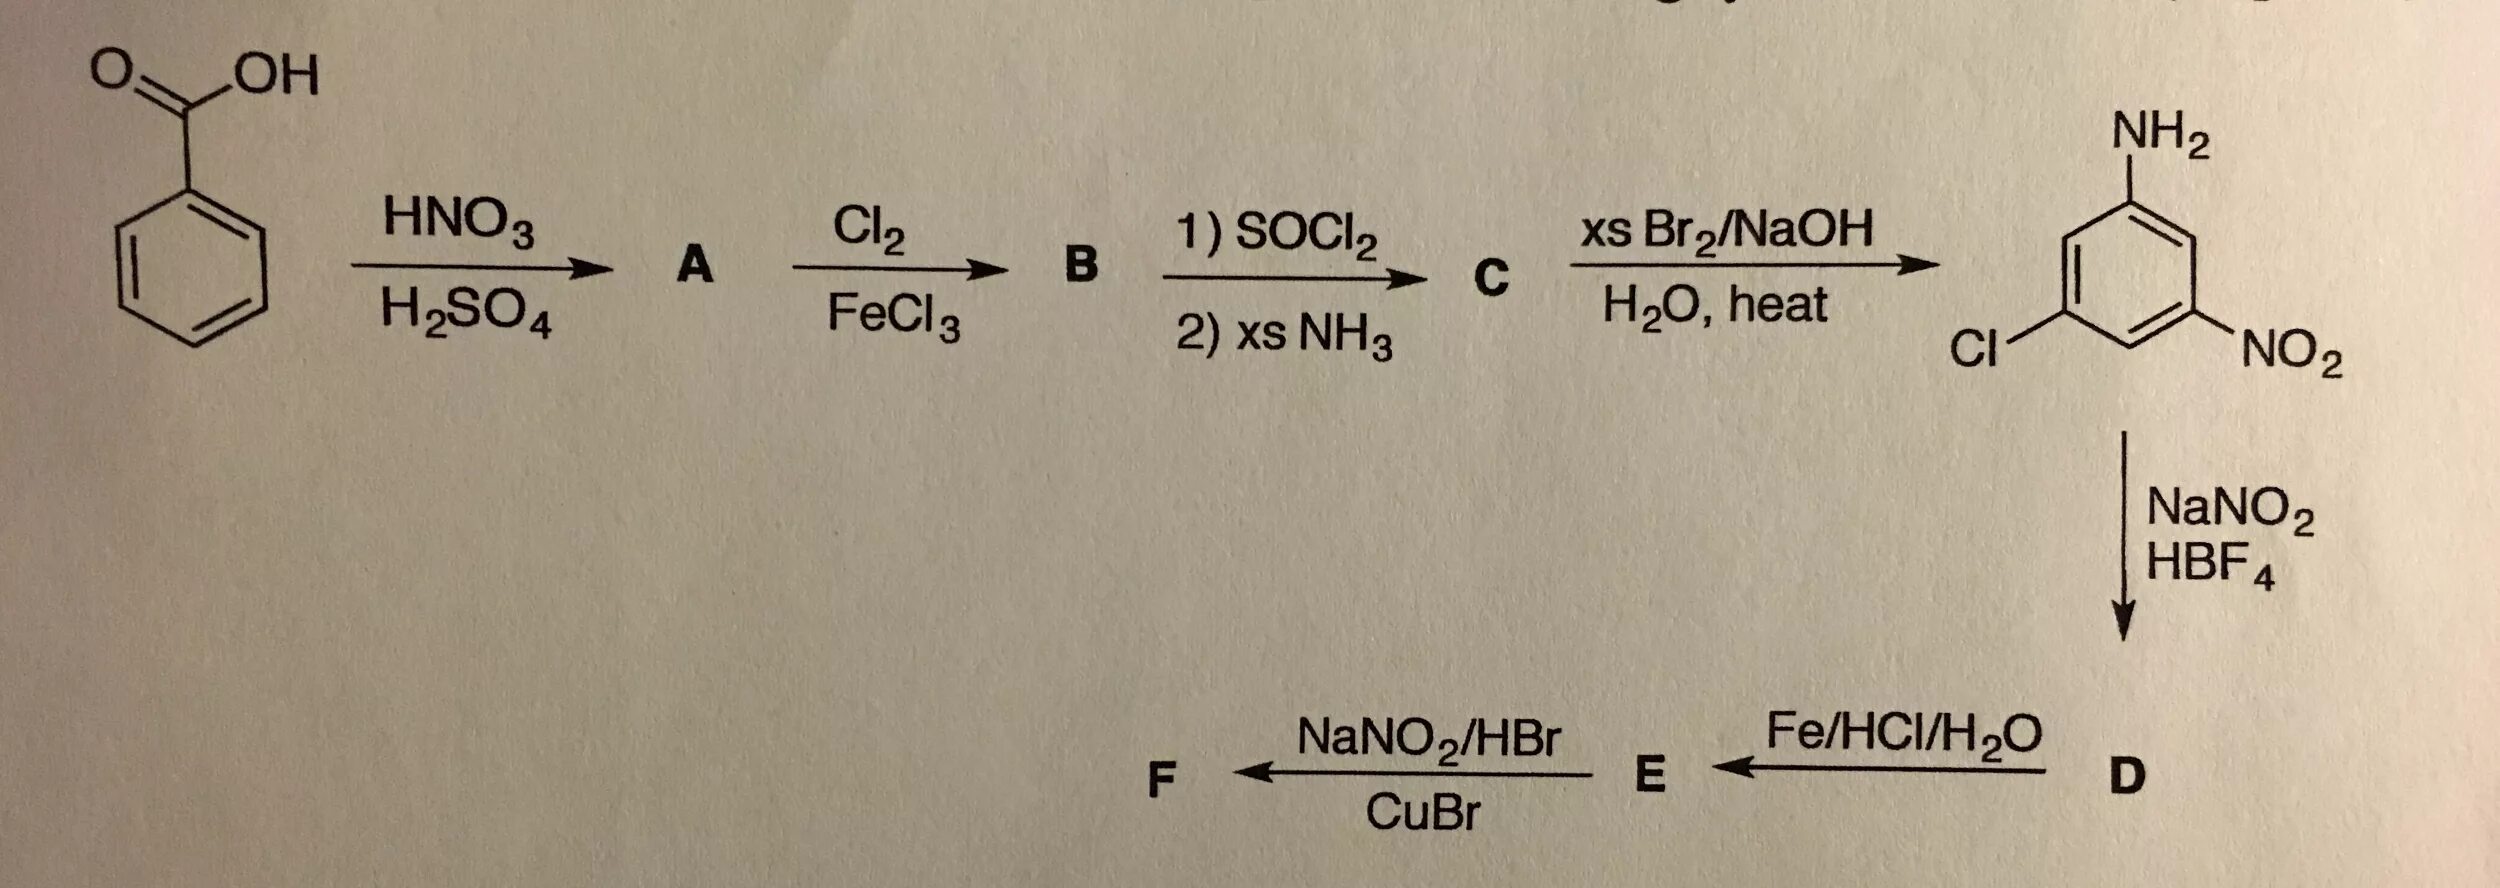 2naoh h. Ch3nh3br + hno2. Бензол hno2. Бензол hno3 h2so4. Метилбензол + 2cl2 al2o3.